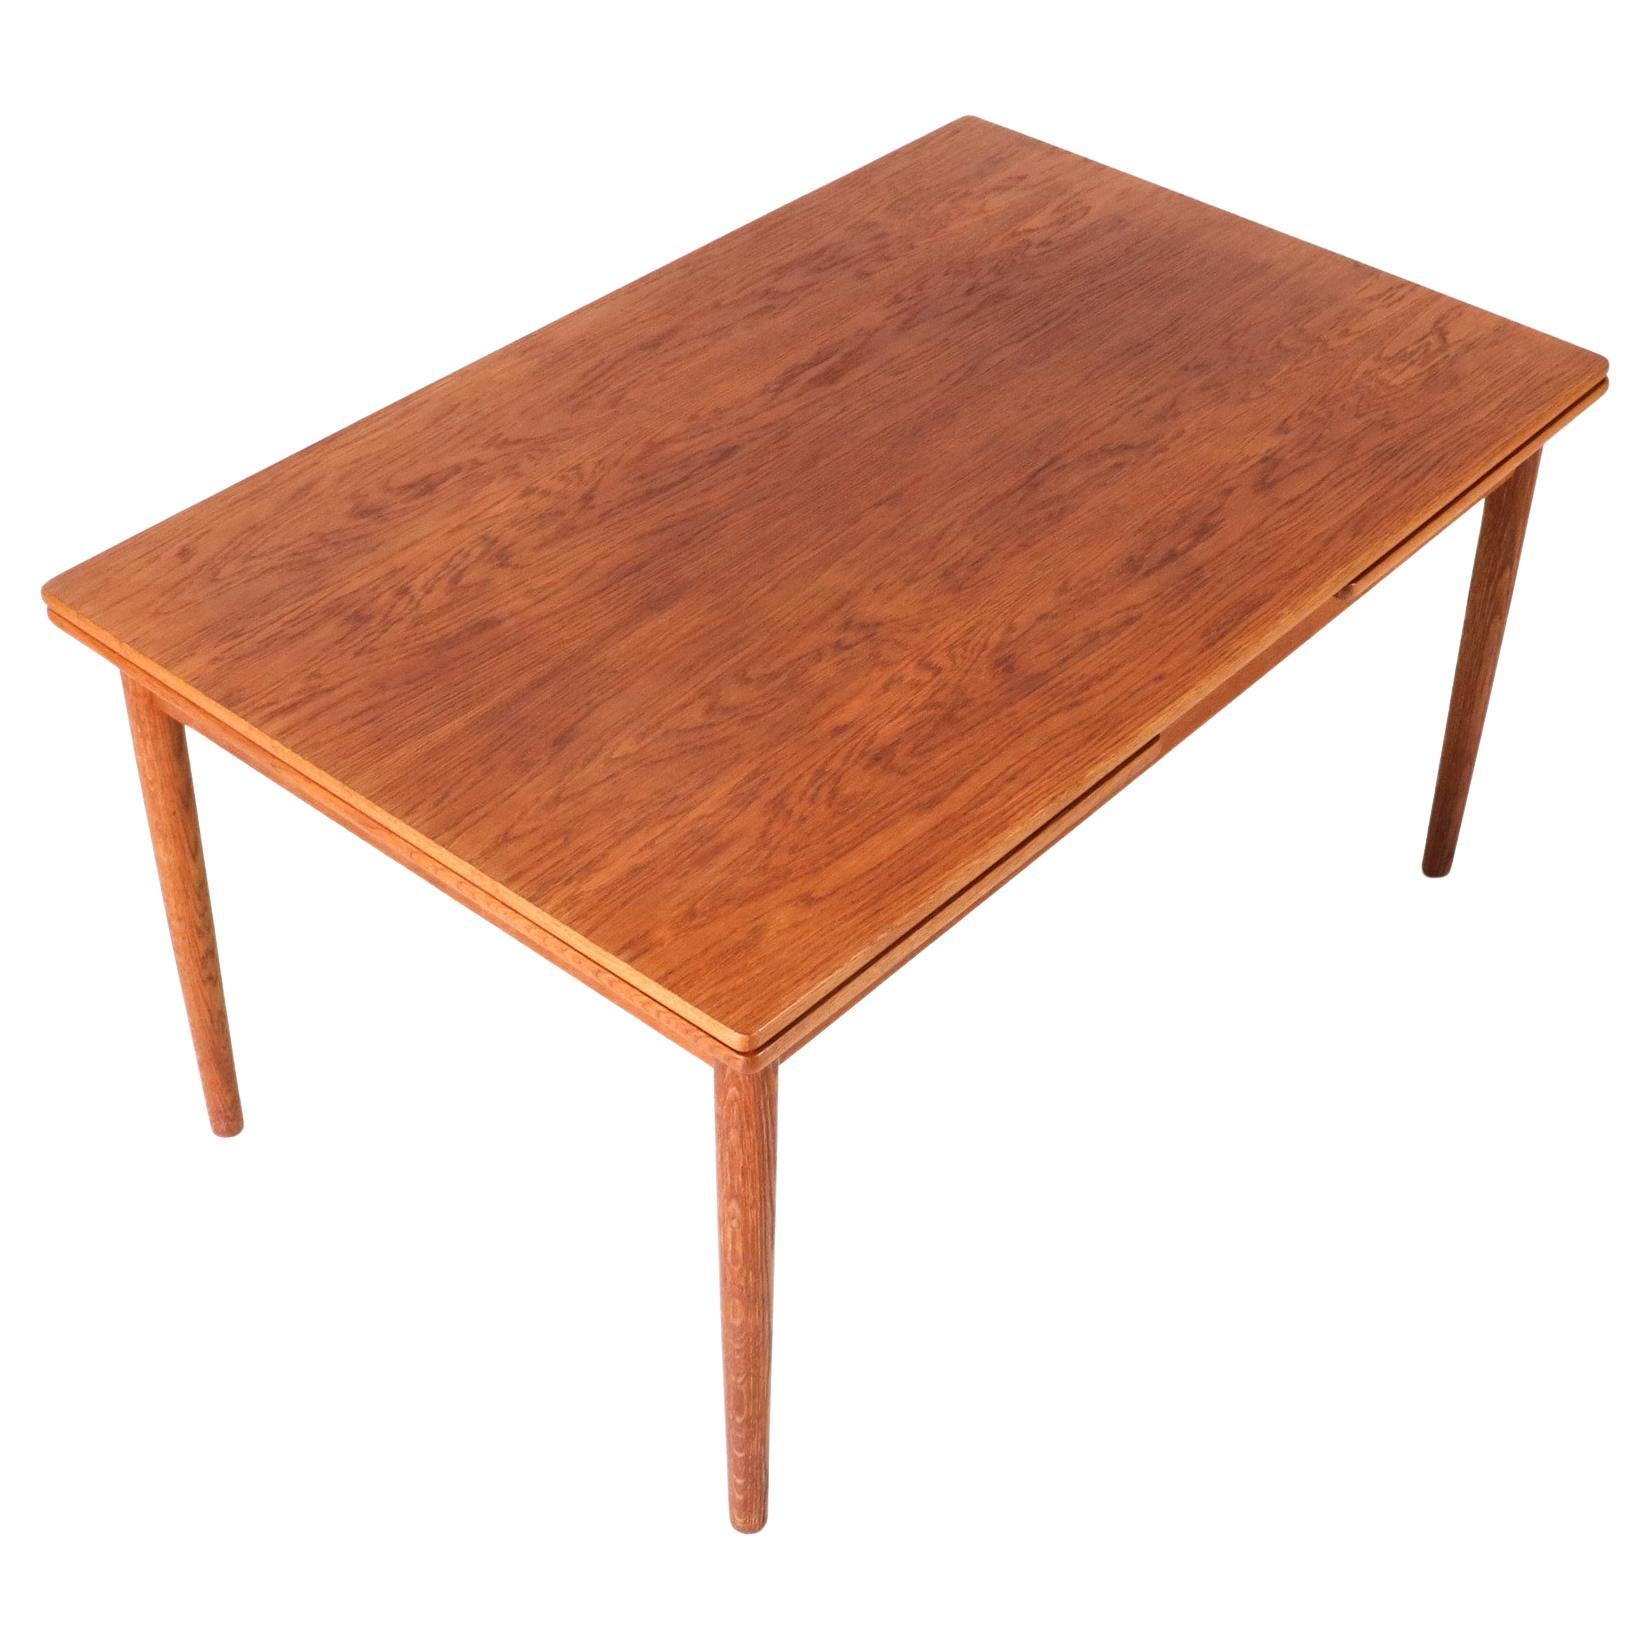  Mid-Century Modern Oak AT-316 Dining Table by Hans J. Wegner for Andreas Tuck For Sale